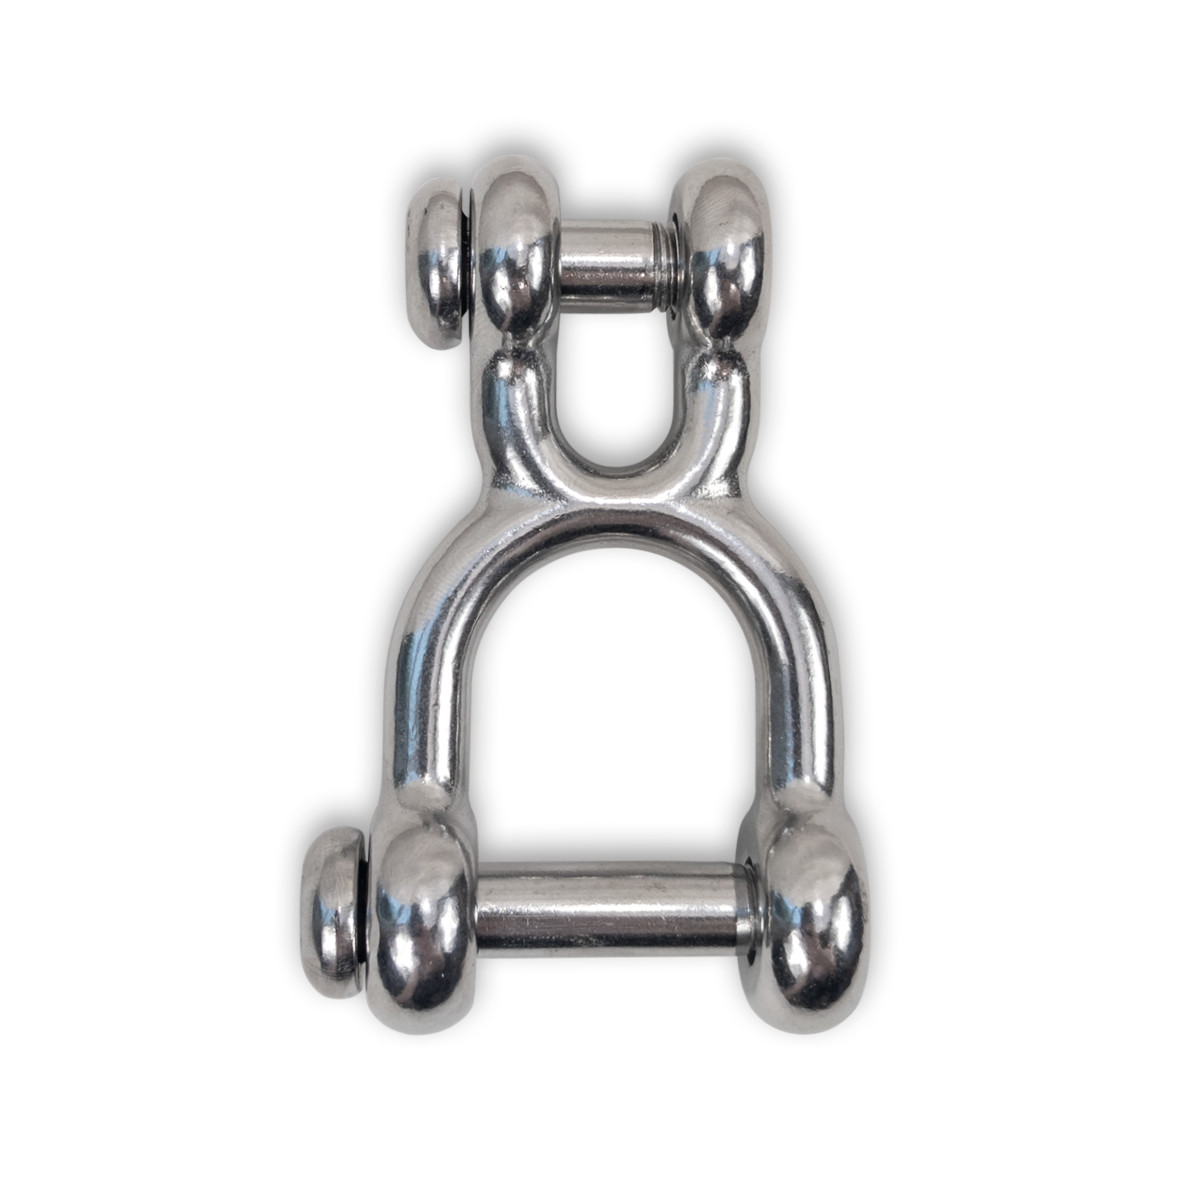 Stainless Steel Double Clevis (H173)